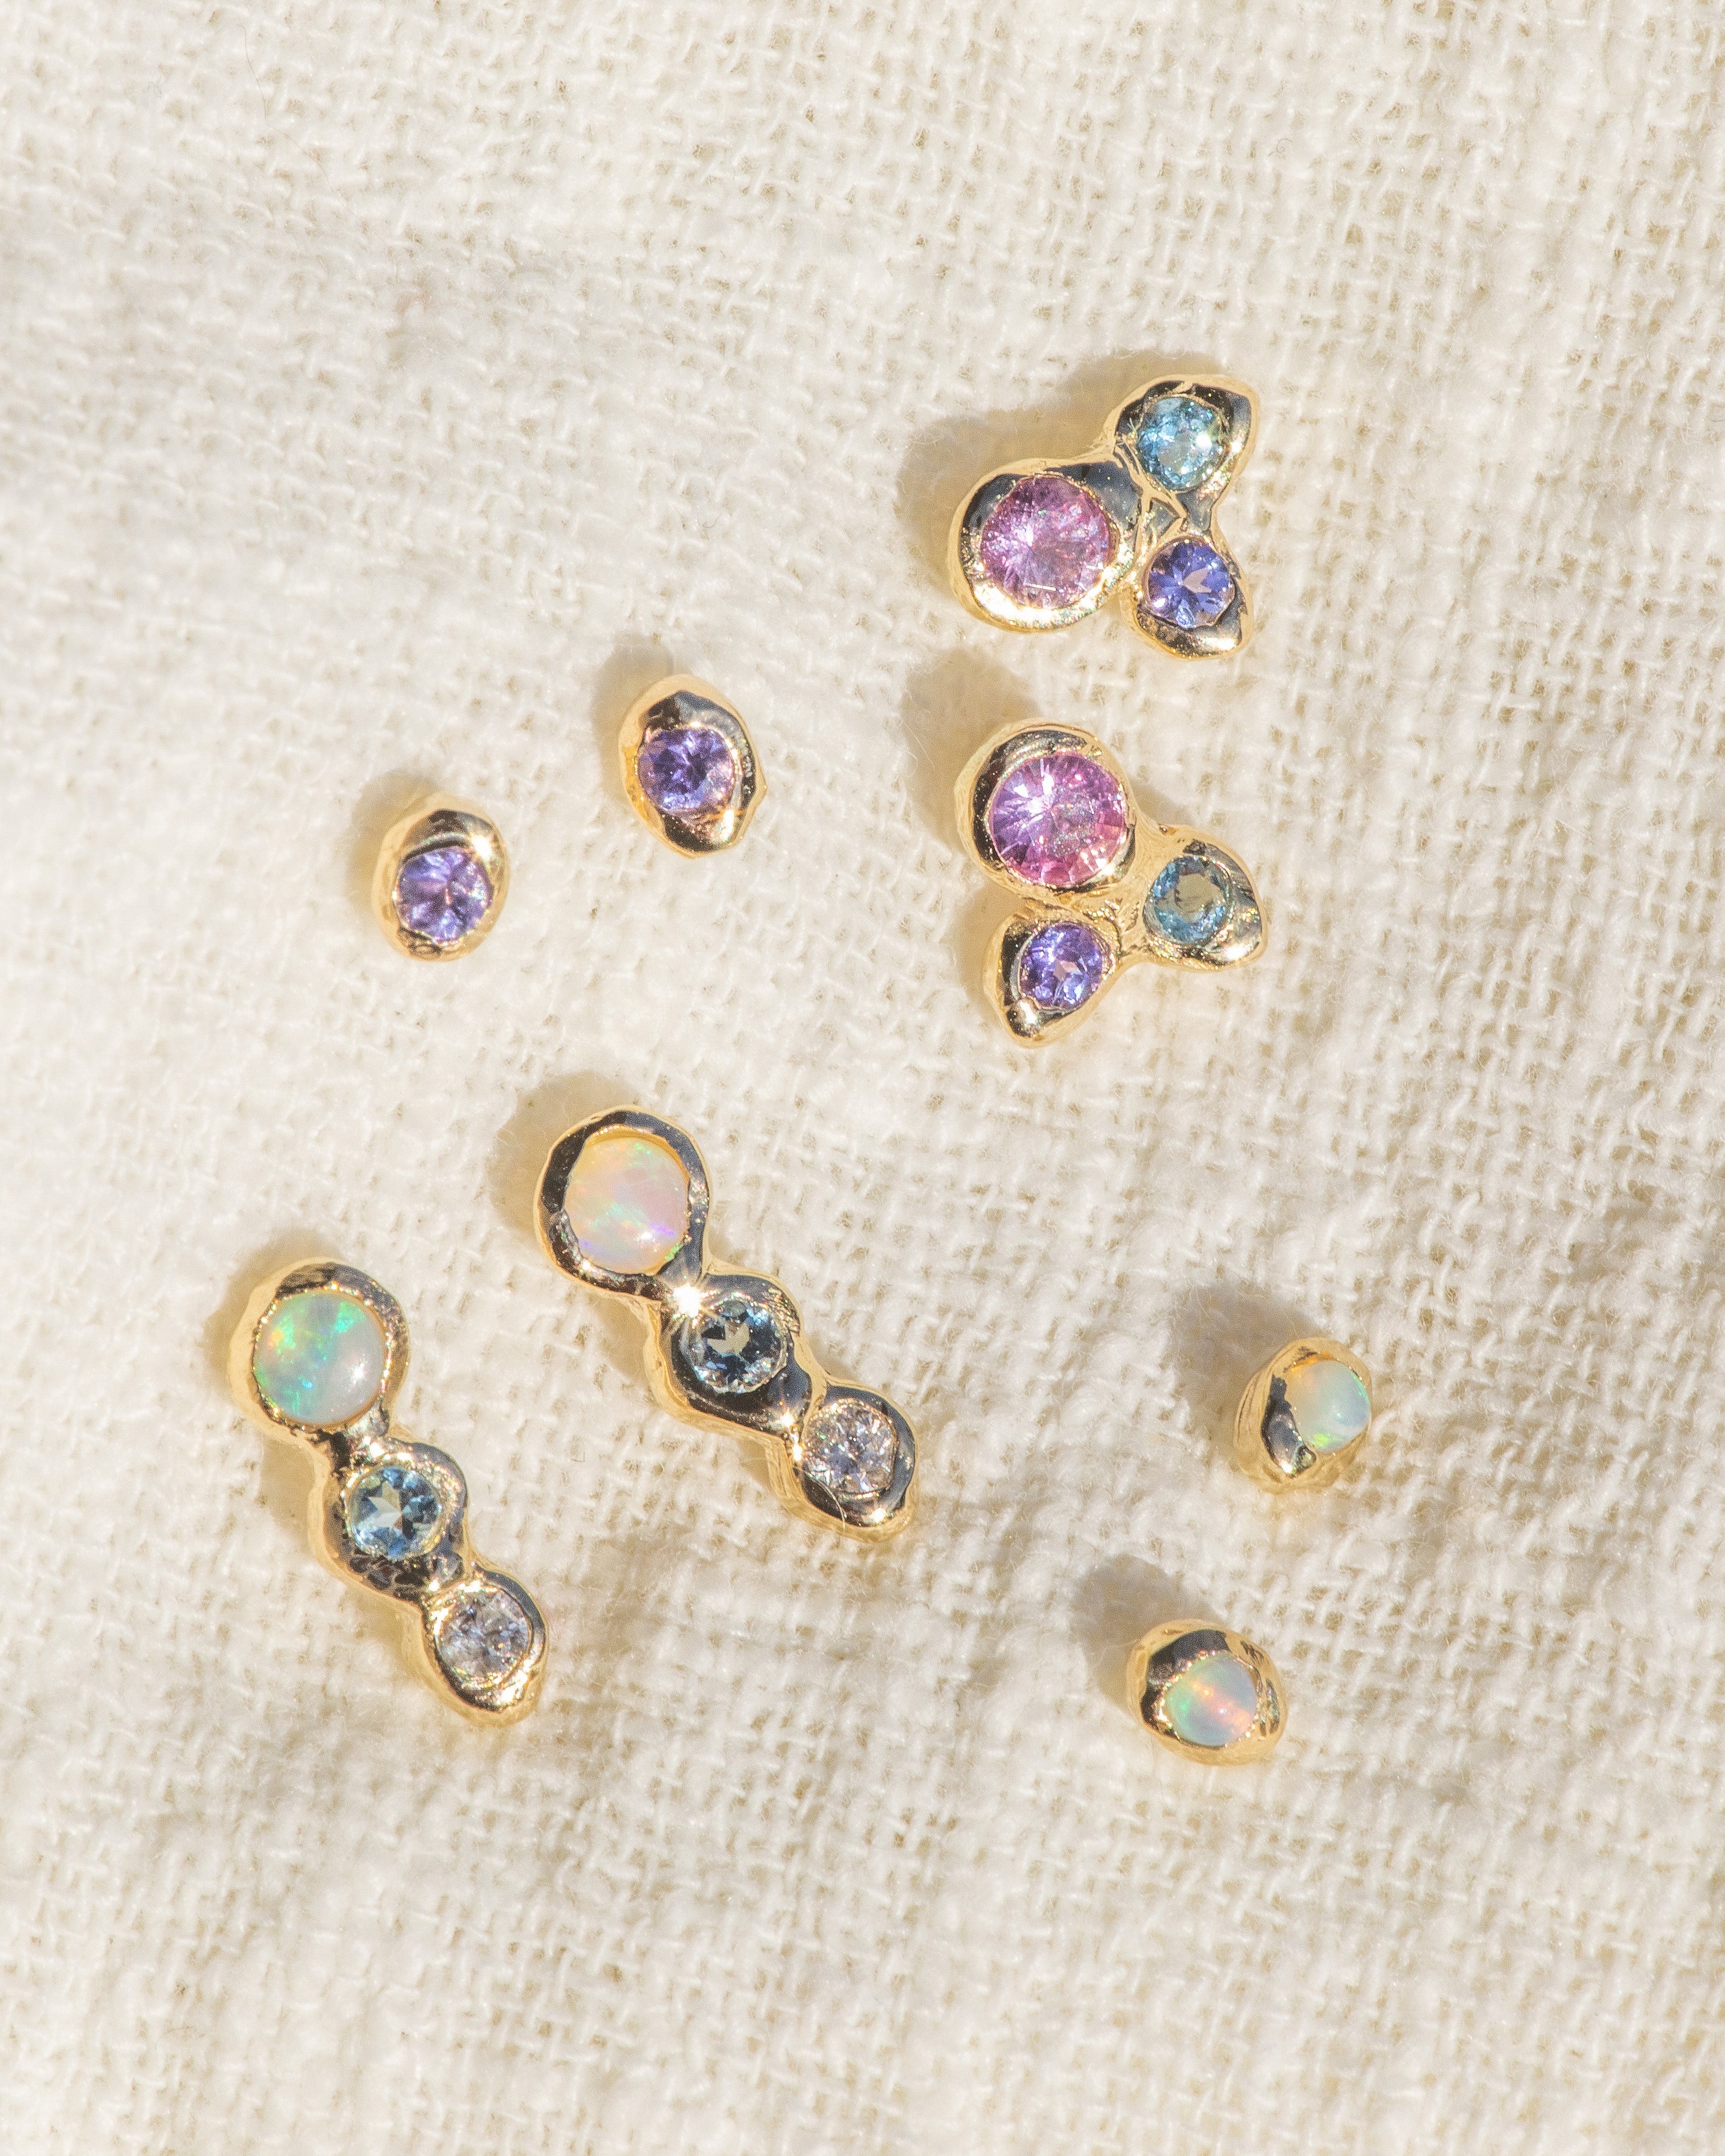 An Array of 14kt Gold Studs: Baby Heirloom Studs, Valentina Studs and Droplette Studs